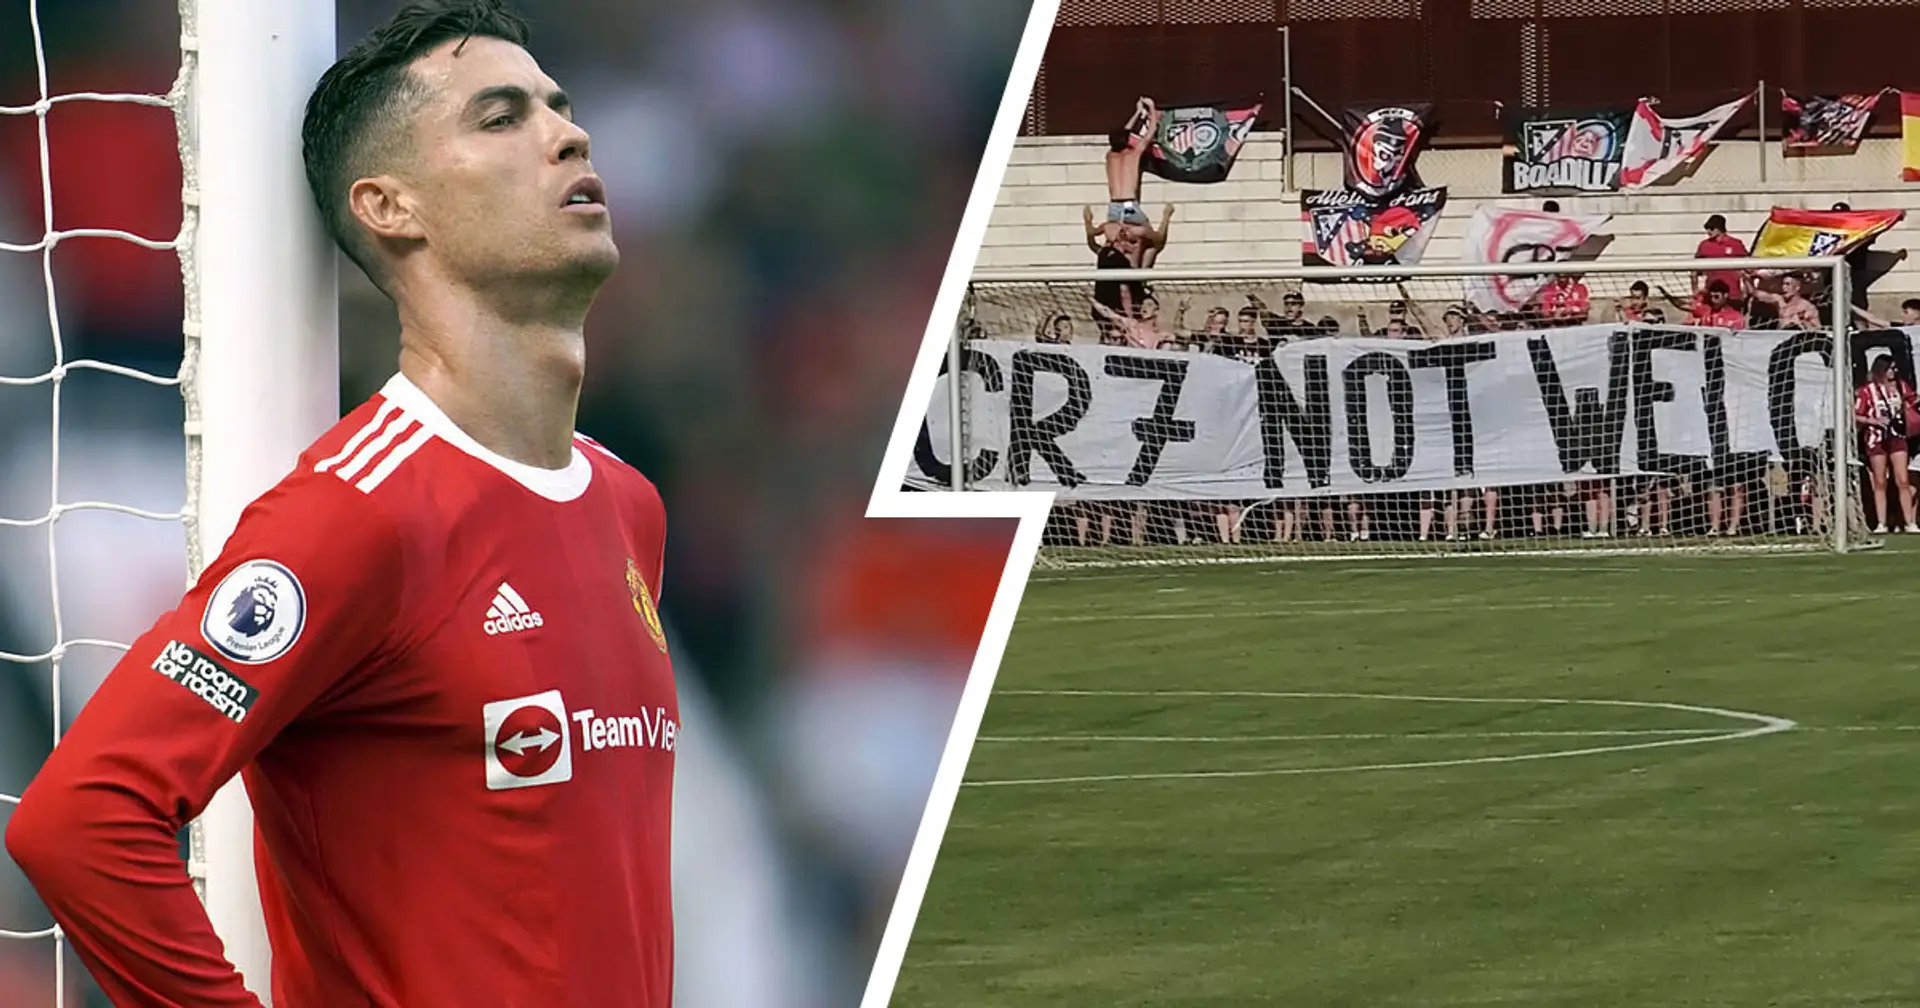 'CR7 not welcome': Atletico Madrid fans unveil brutal sign, send message to Ronaldo